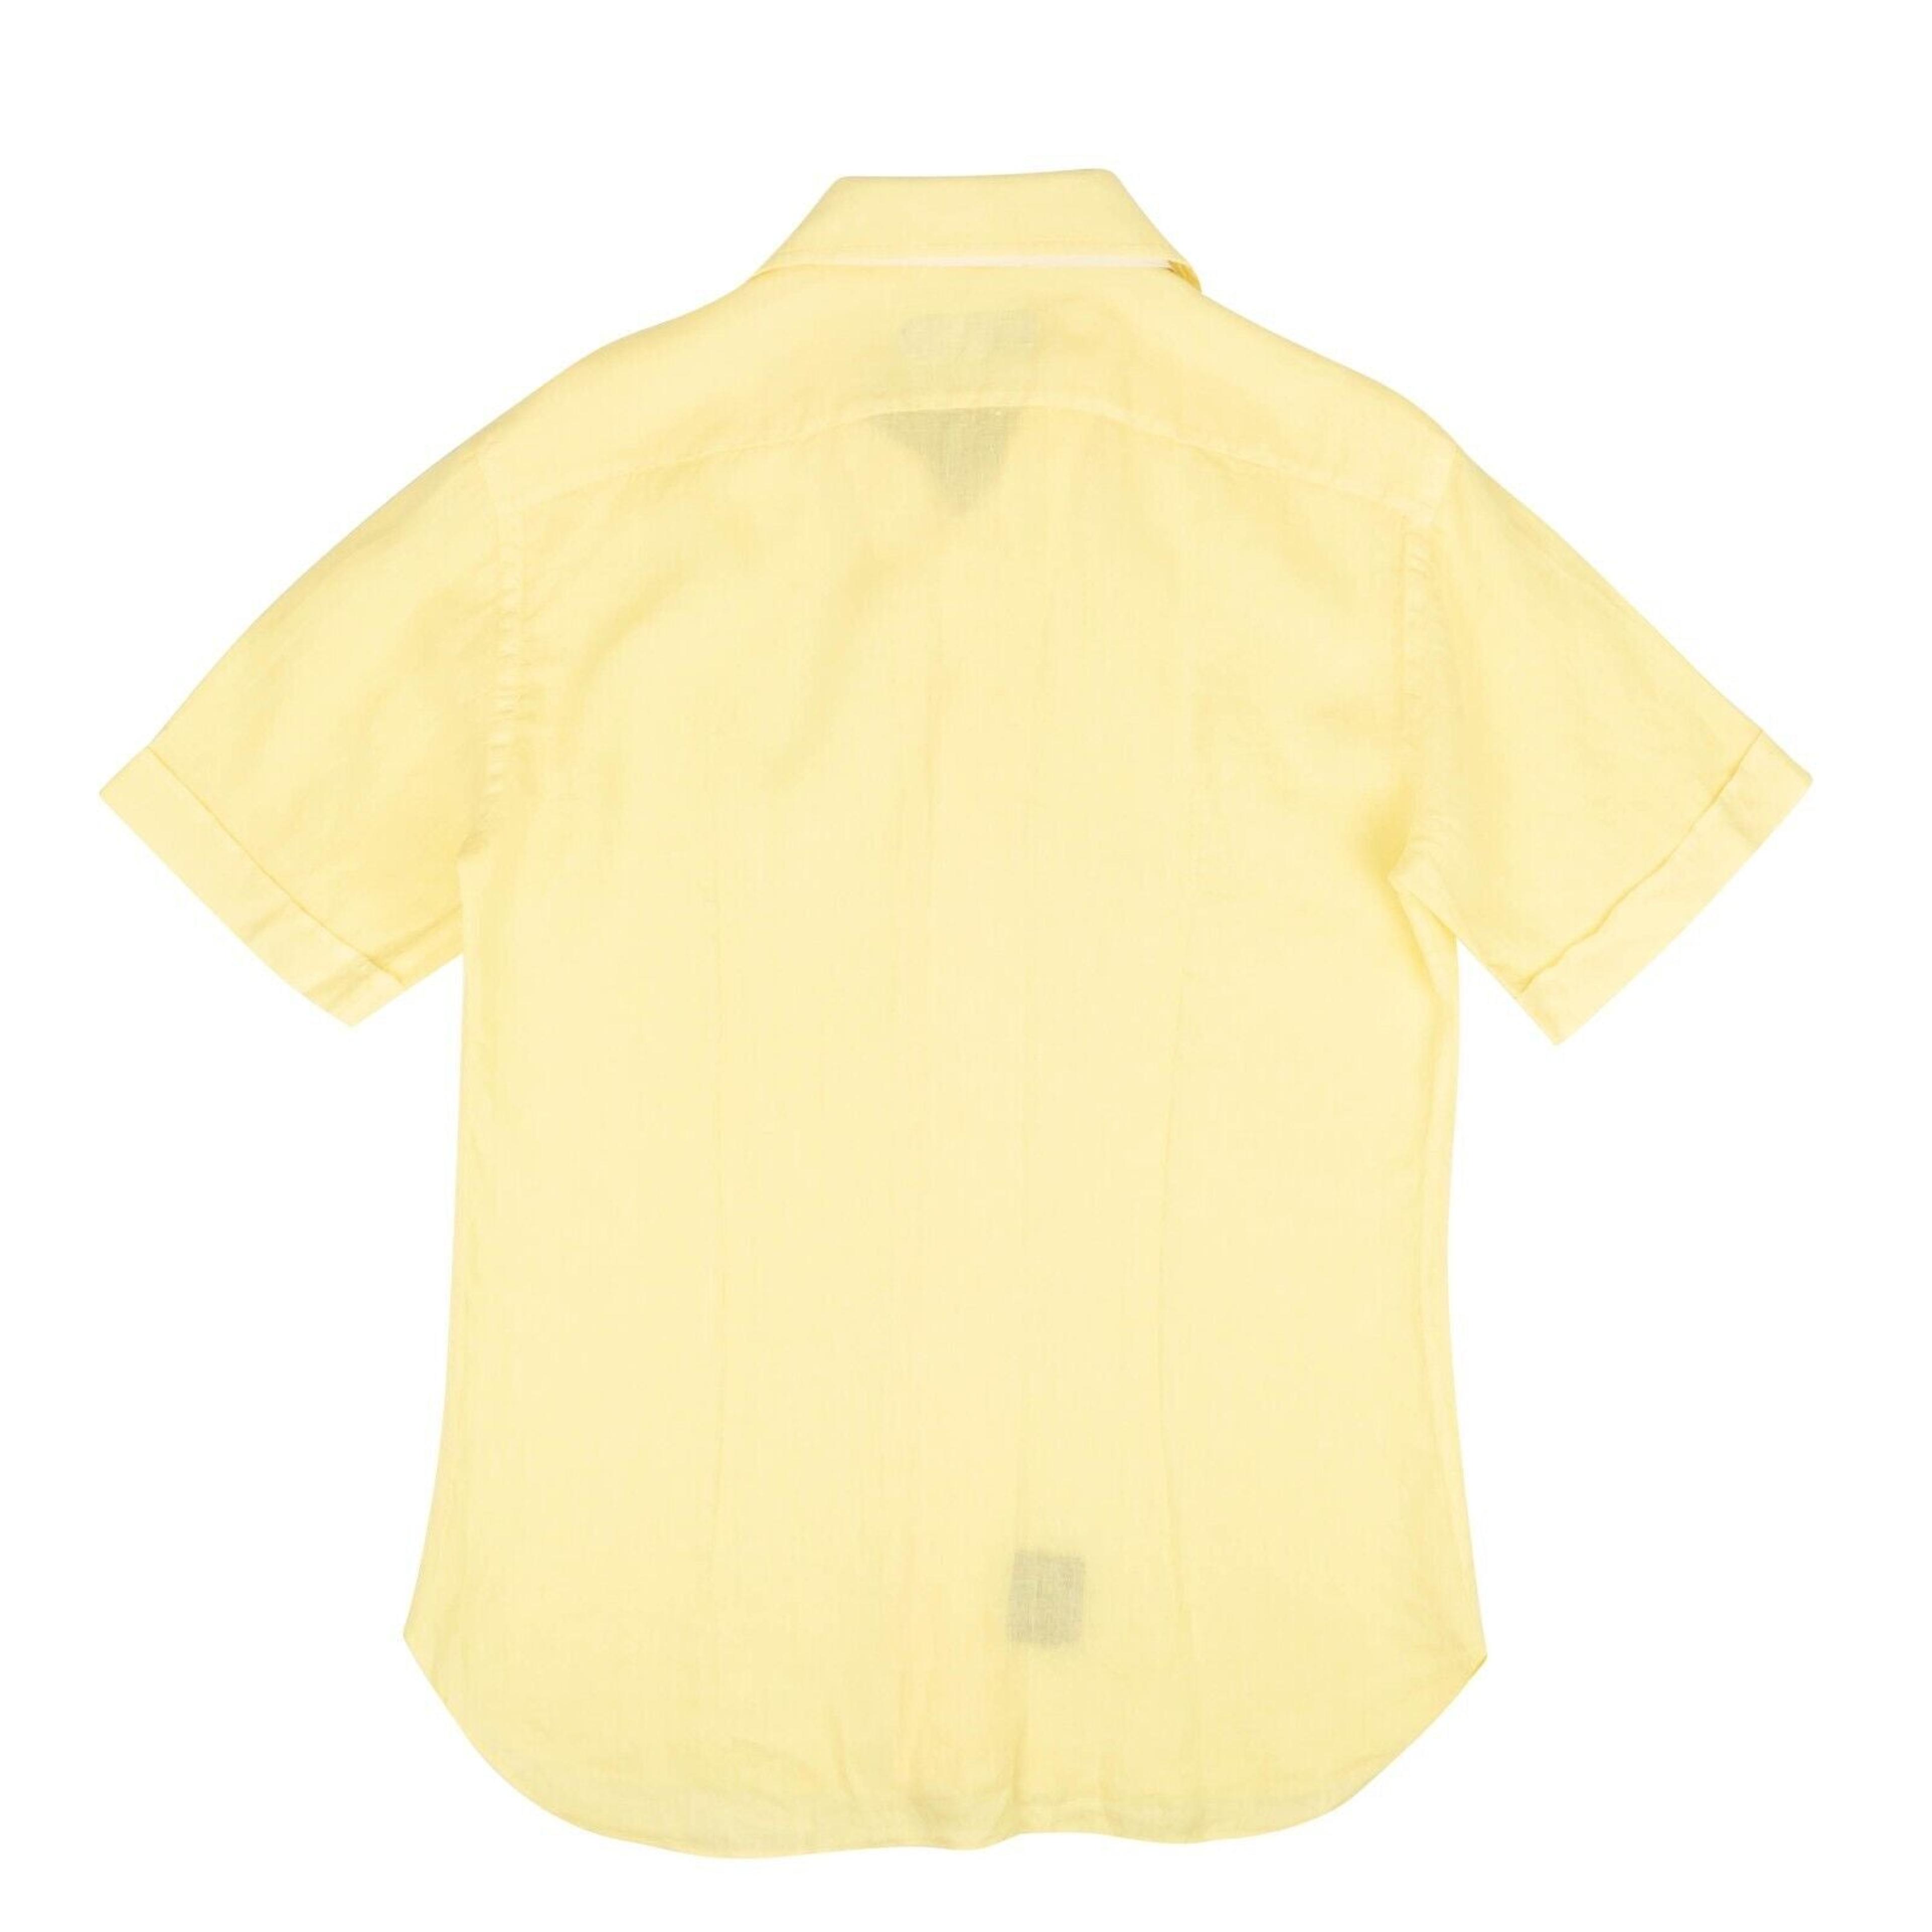 Alternate View 2 of Brioni Linen Slim Fit Short Sleeves Casual Shirt - Yellow